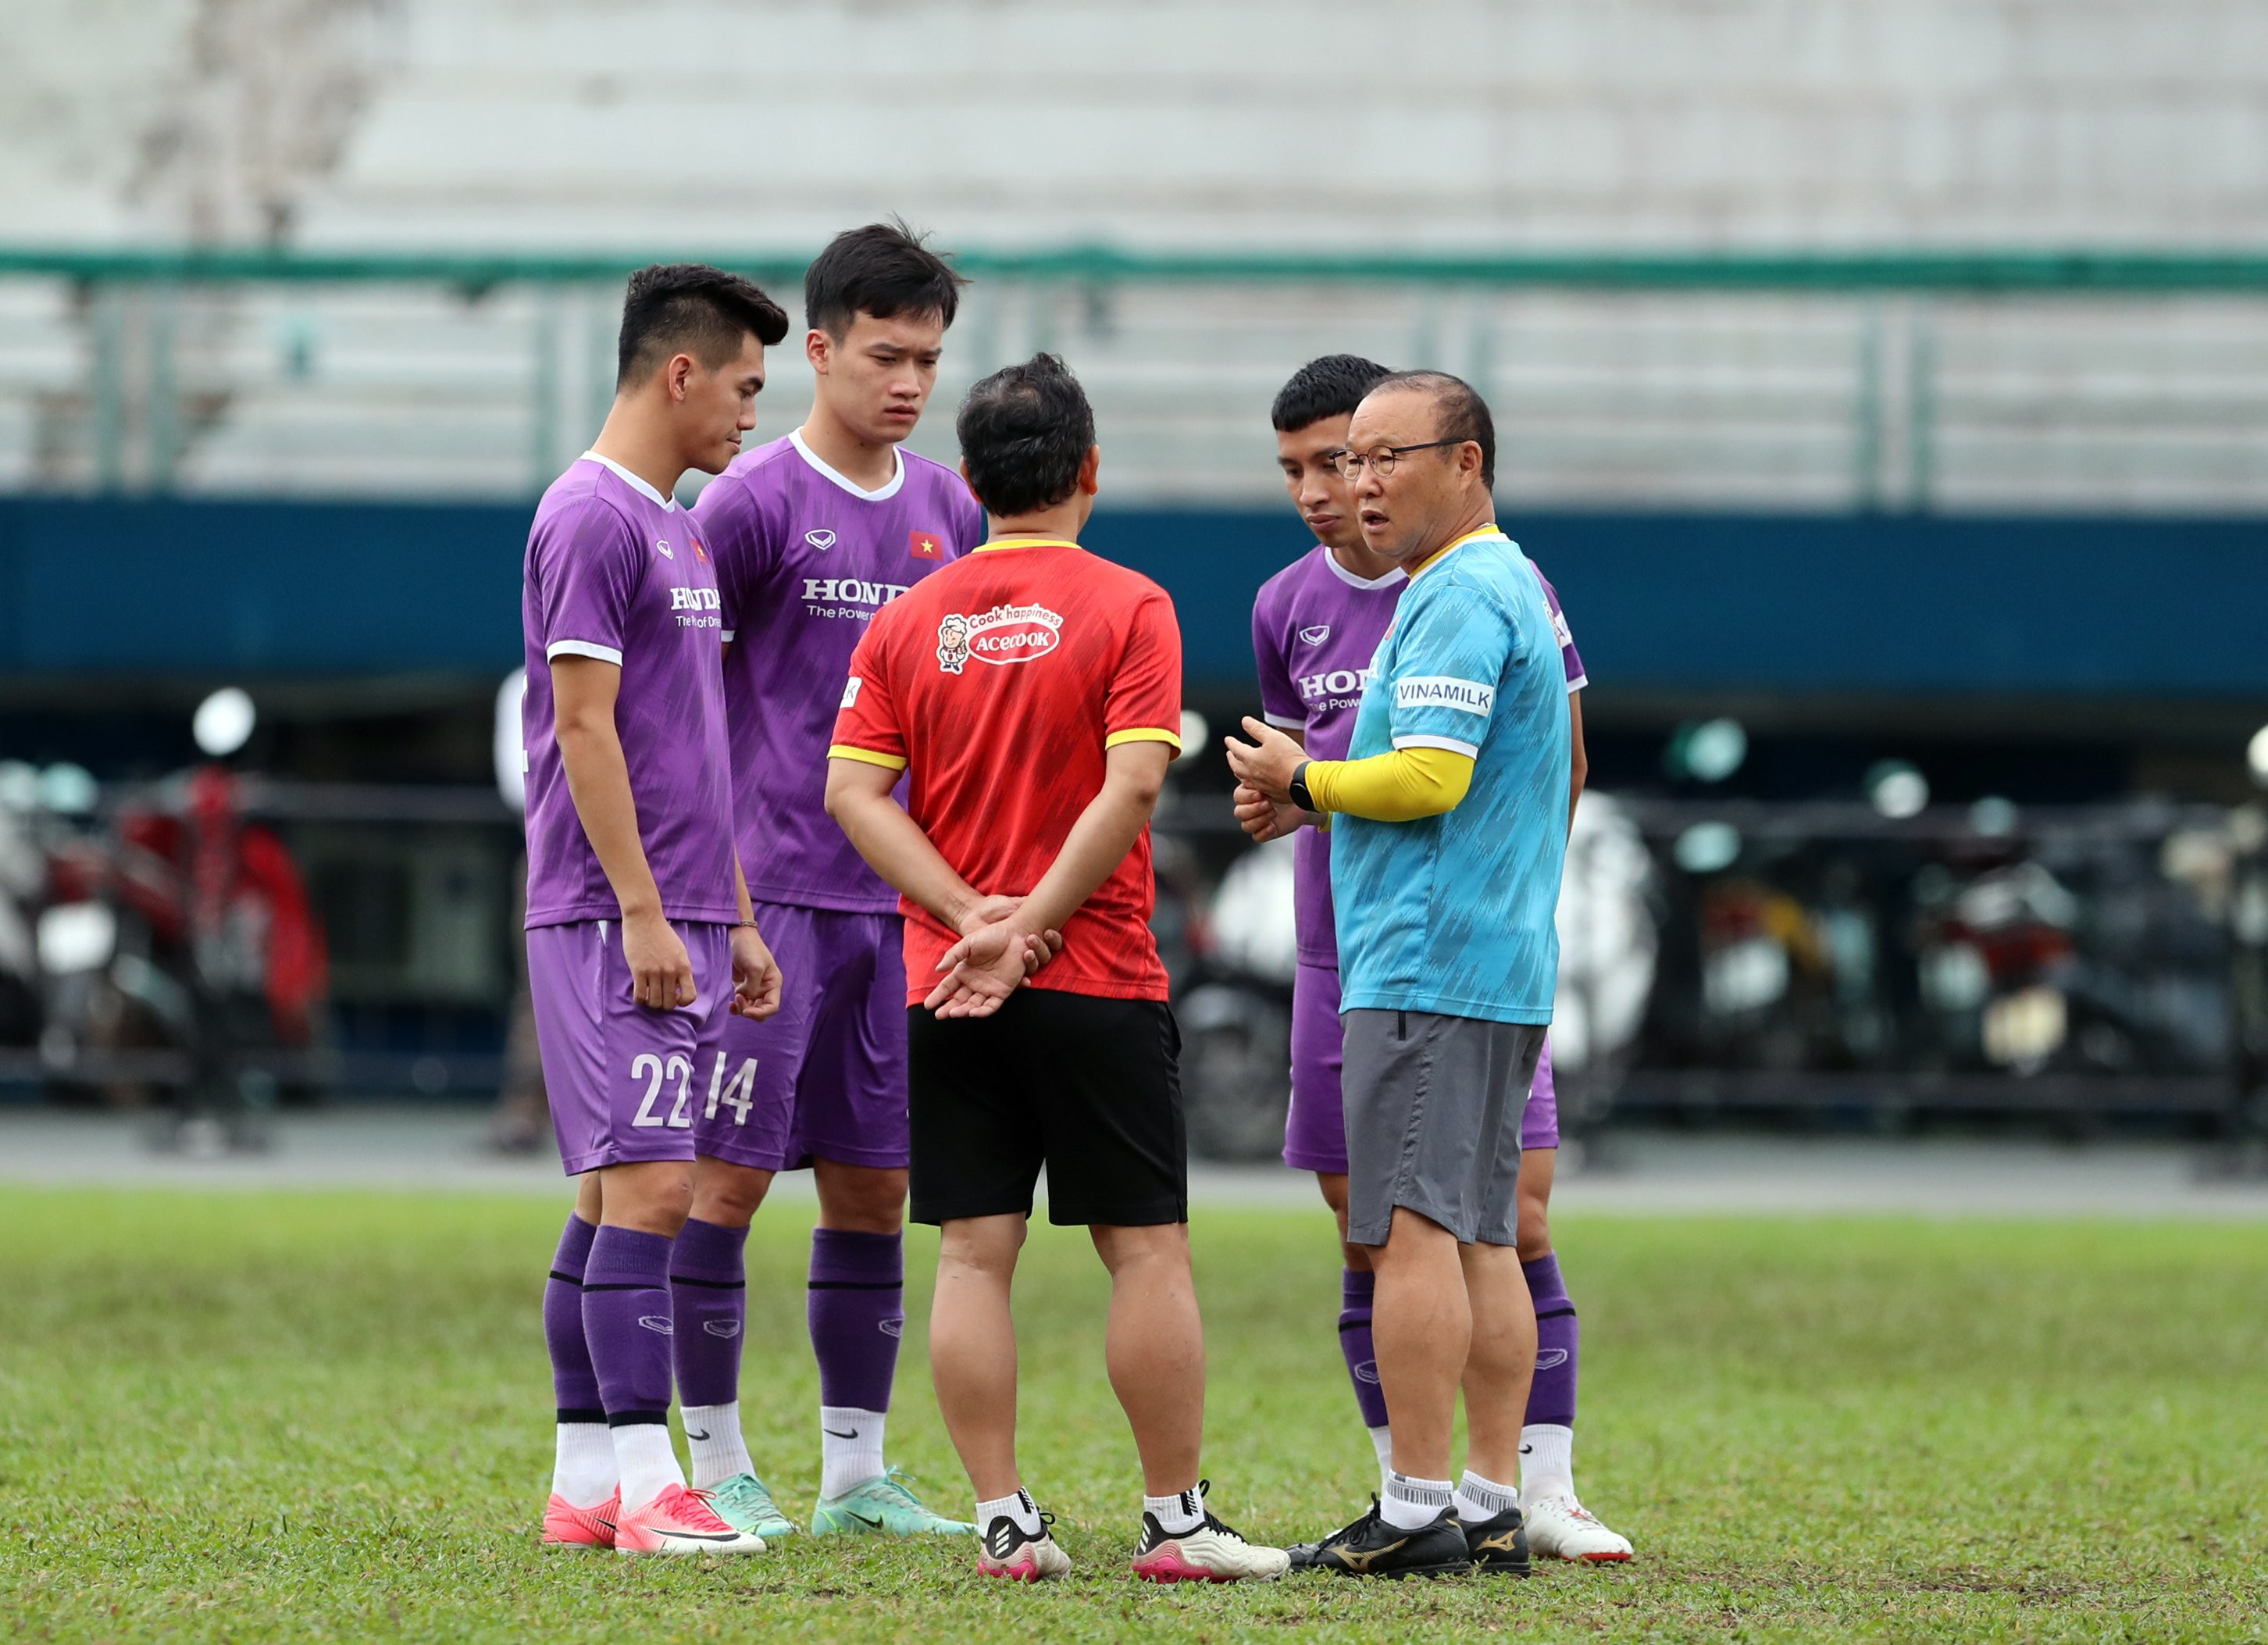 After finishing the quick meeting with the whole team, the Korean captain met privately with 3 over-aged players who had just attended the 31st SEA Games including Hoang Duc, Tien Linh and Hung Dung.